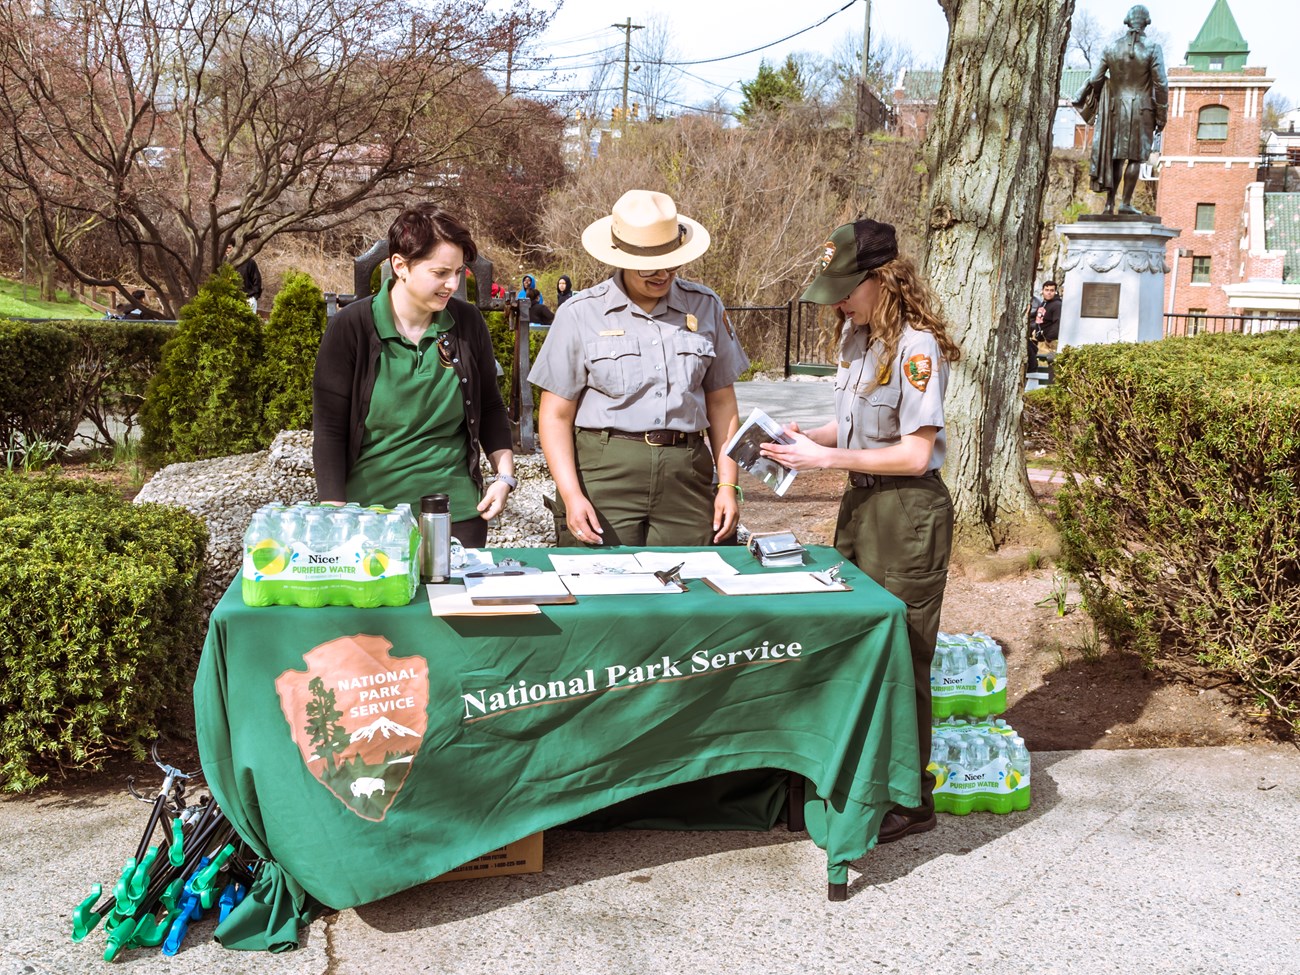 Two park rangers & a green-clad volunteer stand at an info table w/ a green National Park Service covered in flyers, sign-in sheets, & bottled water. One reviews a flyer. Behind them are trees & shrubs, a statue of Alexander Hamilton, & a brick building